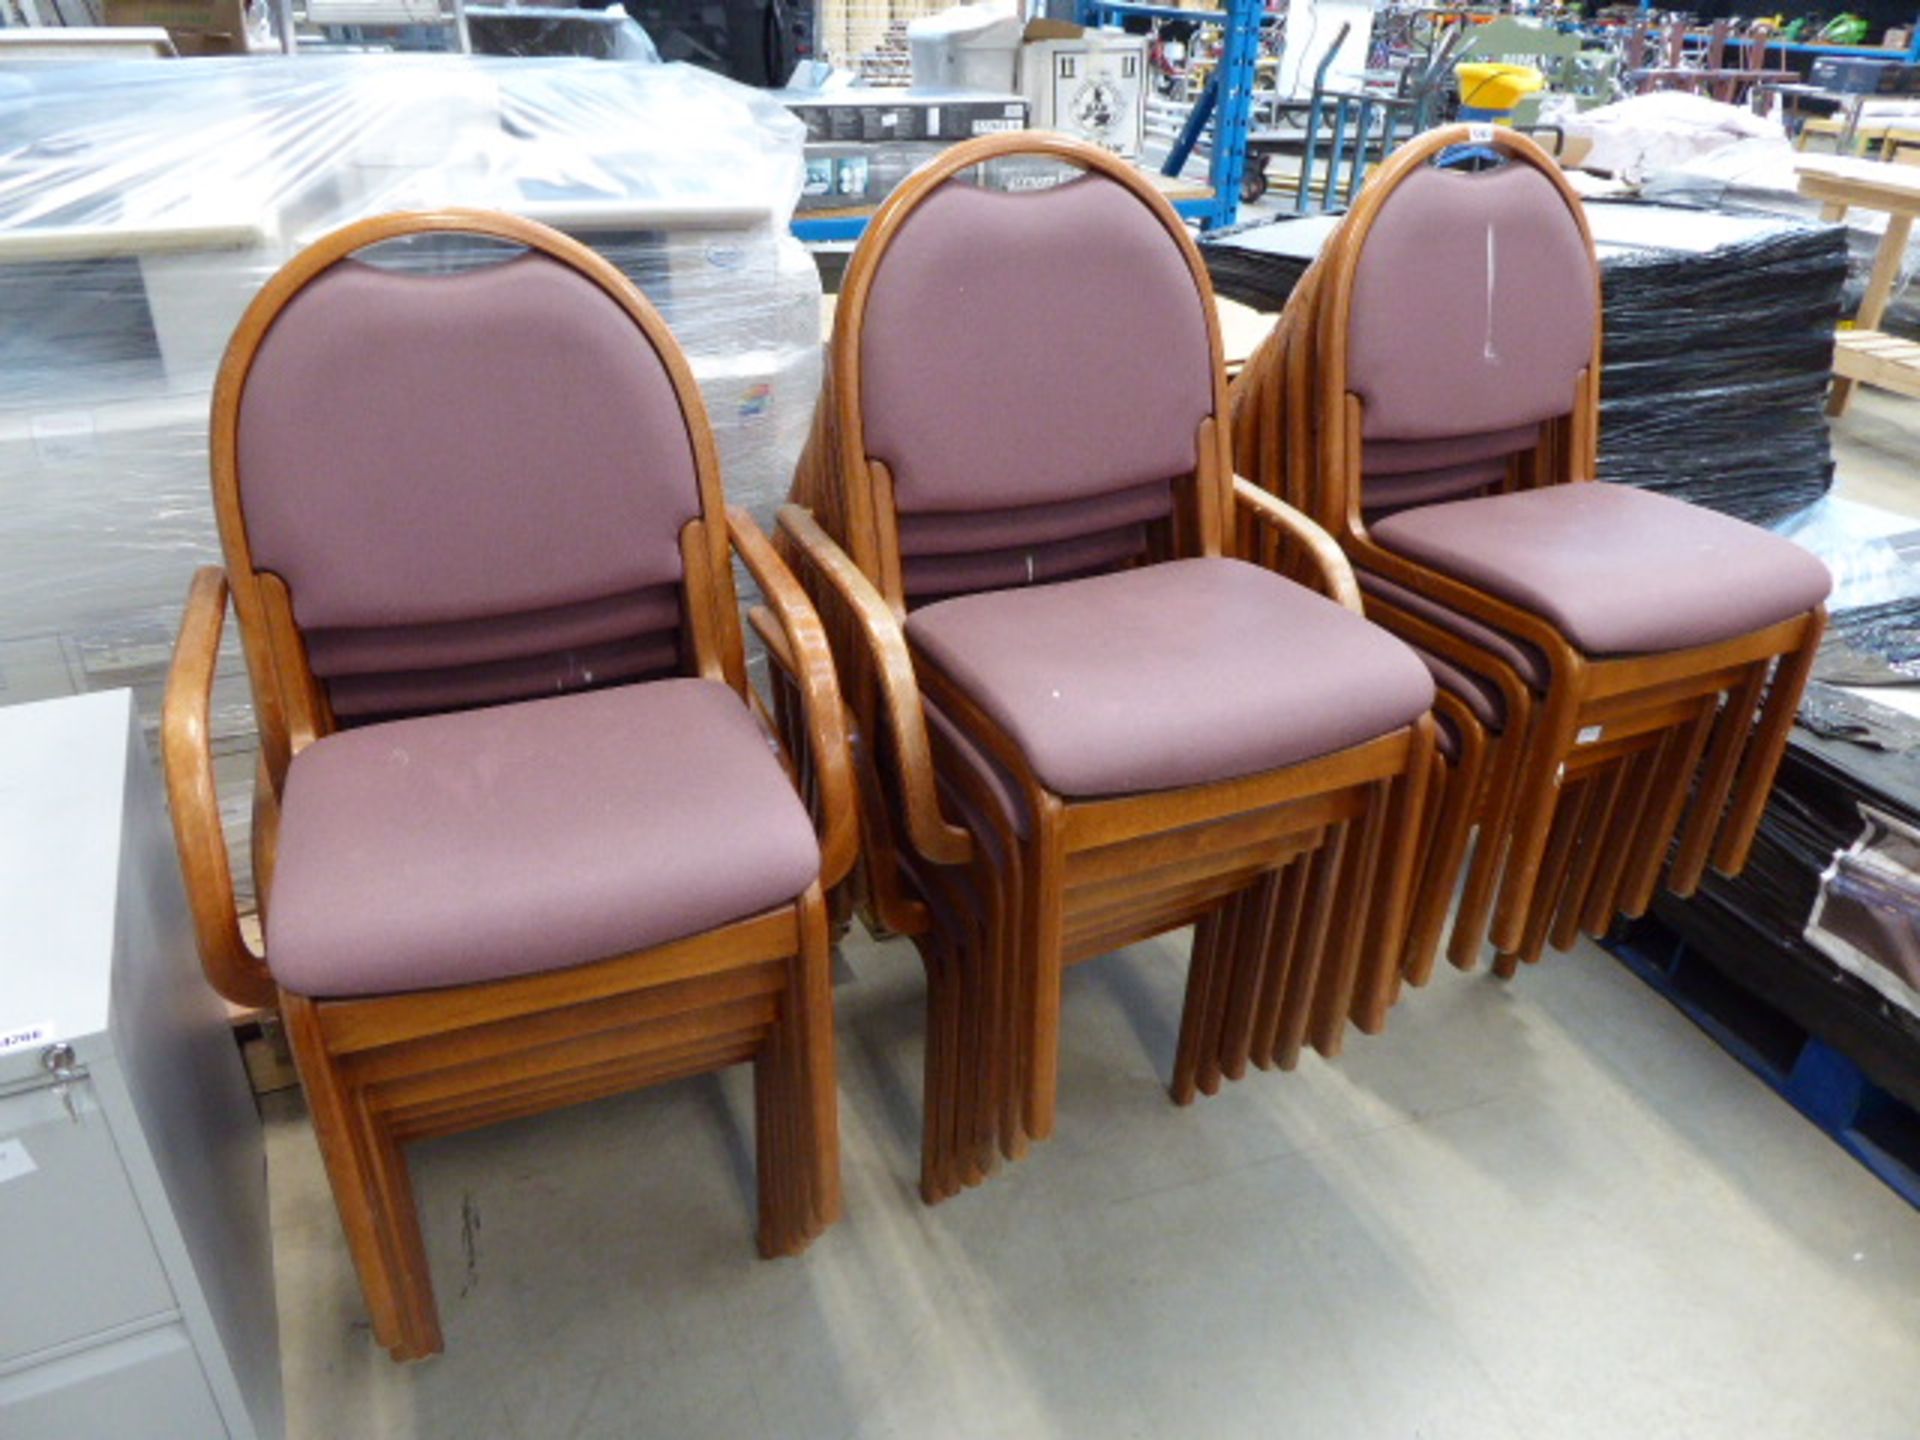 4275 - 20 brown framed purple stacking chairs